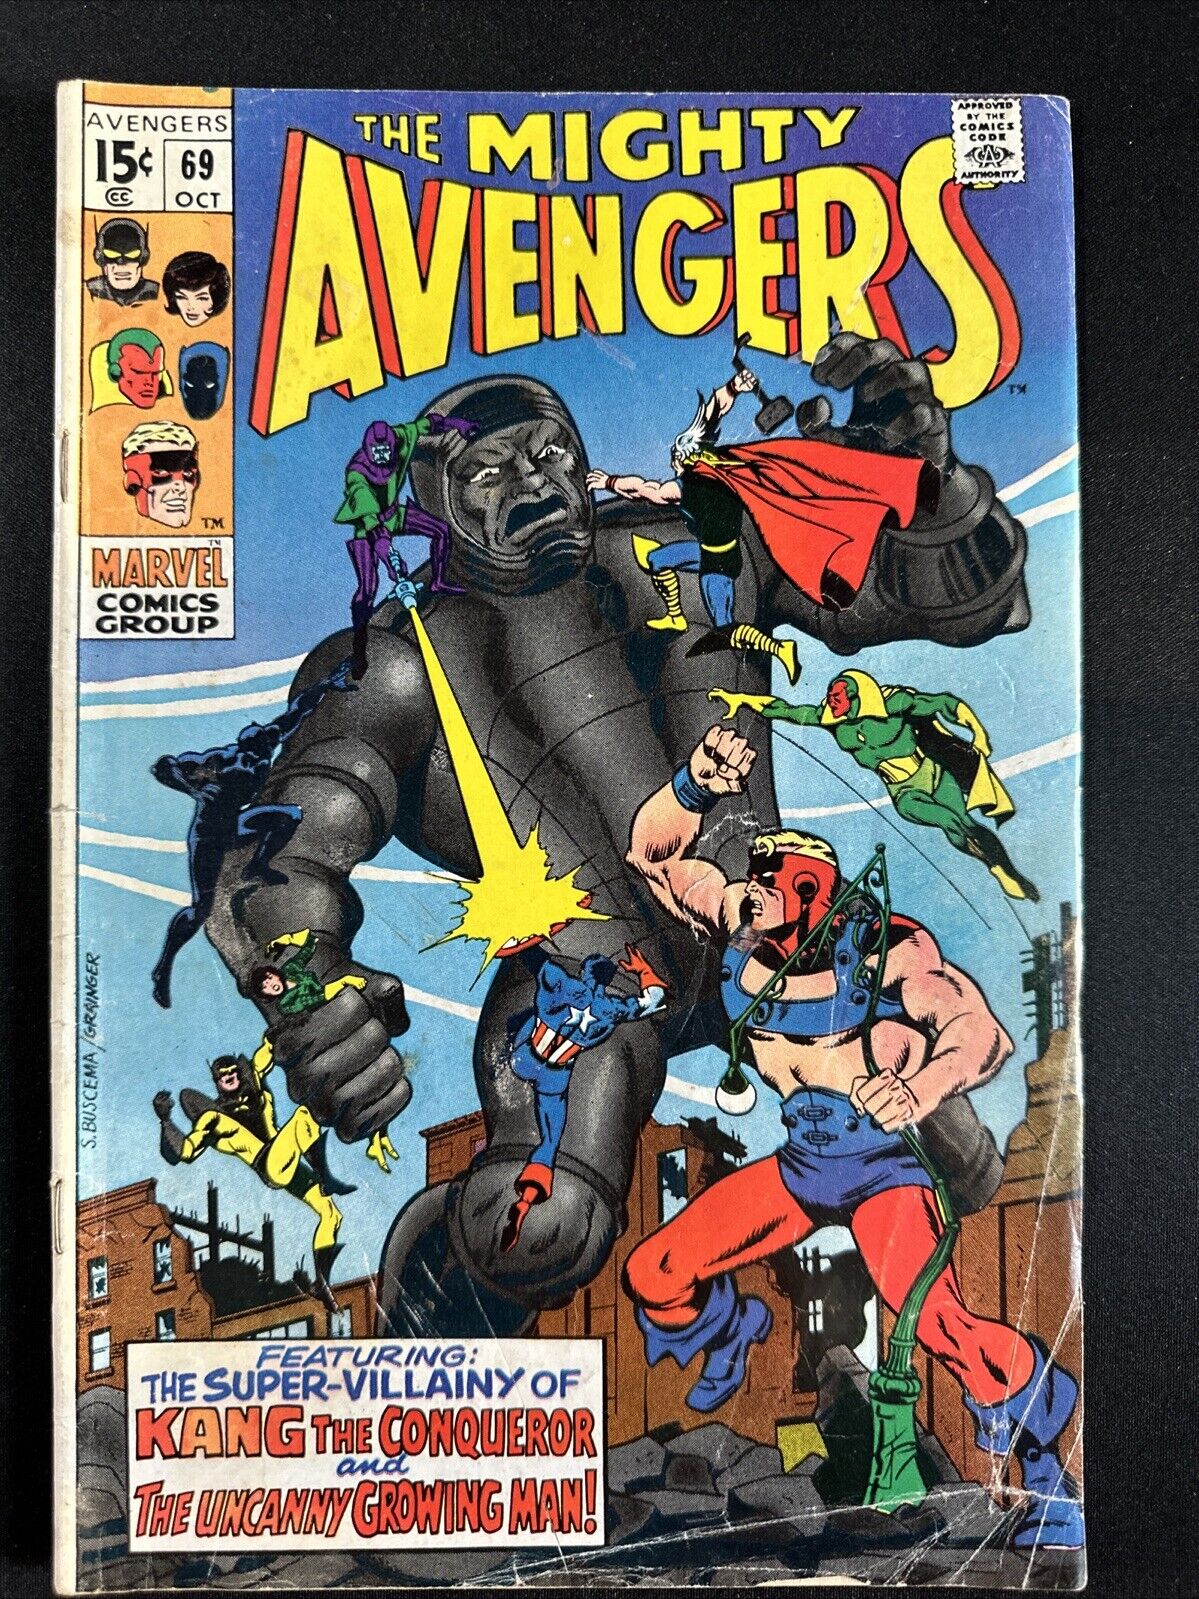 The Avengers #69 1969 Vintage Old Marvel Comics Silver Age 1st Print Good *A3